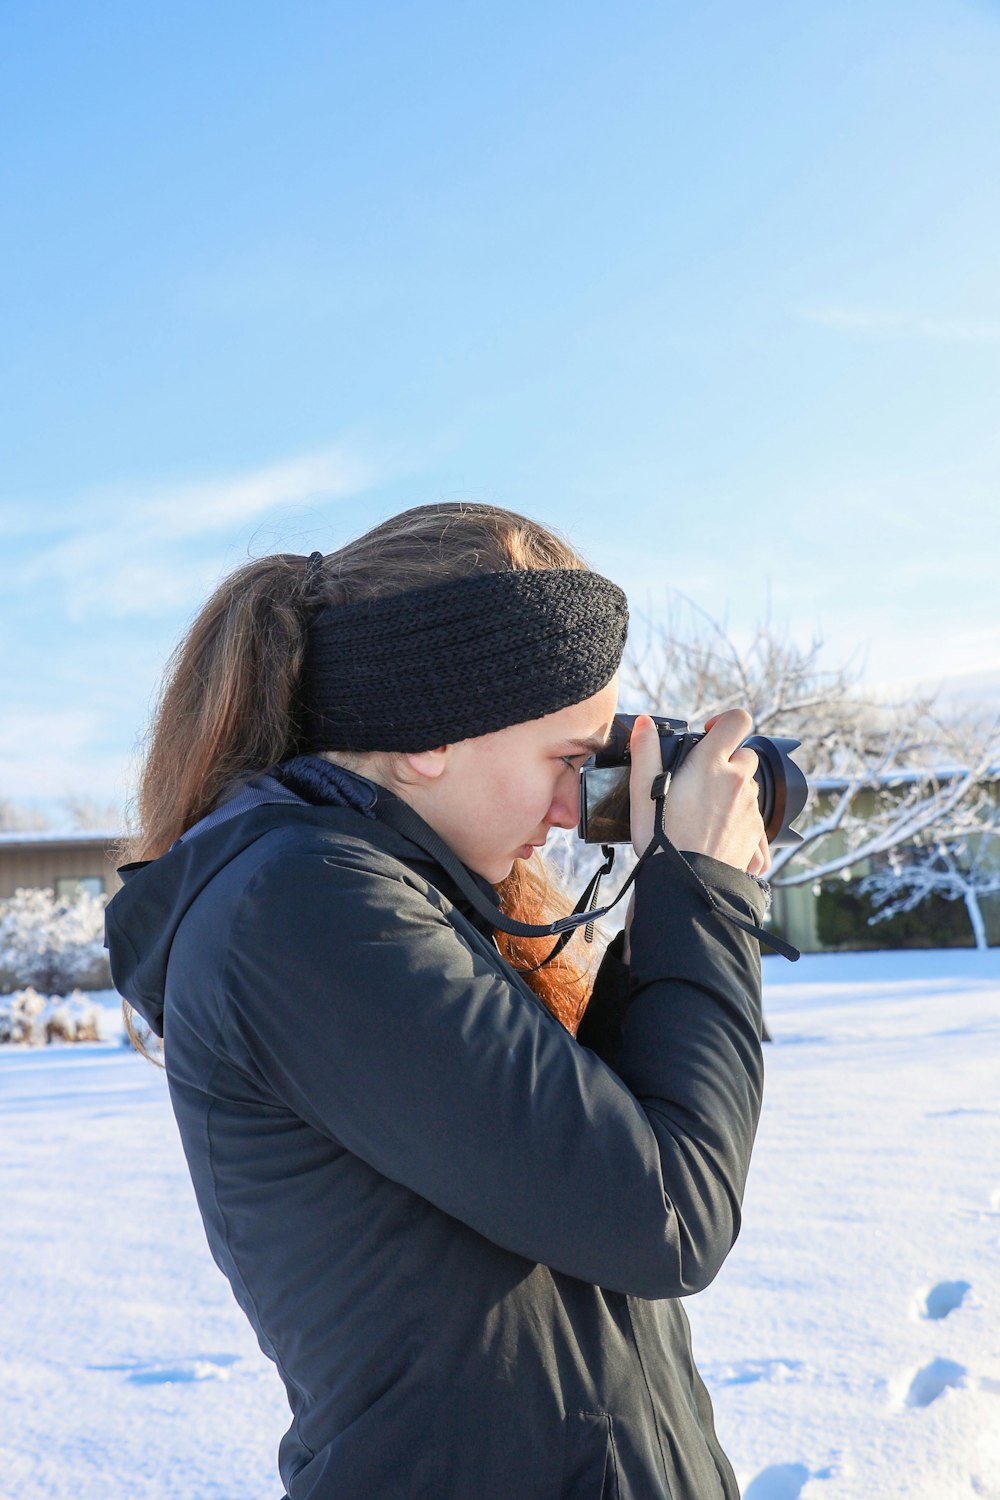 a woman taking a picture with a camera in the snow